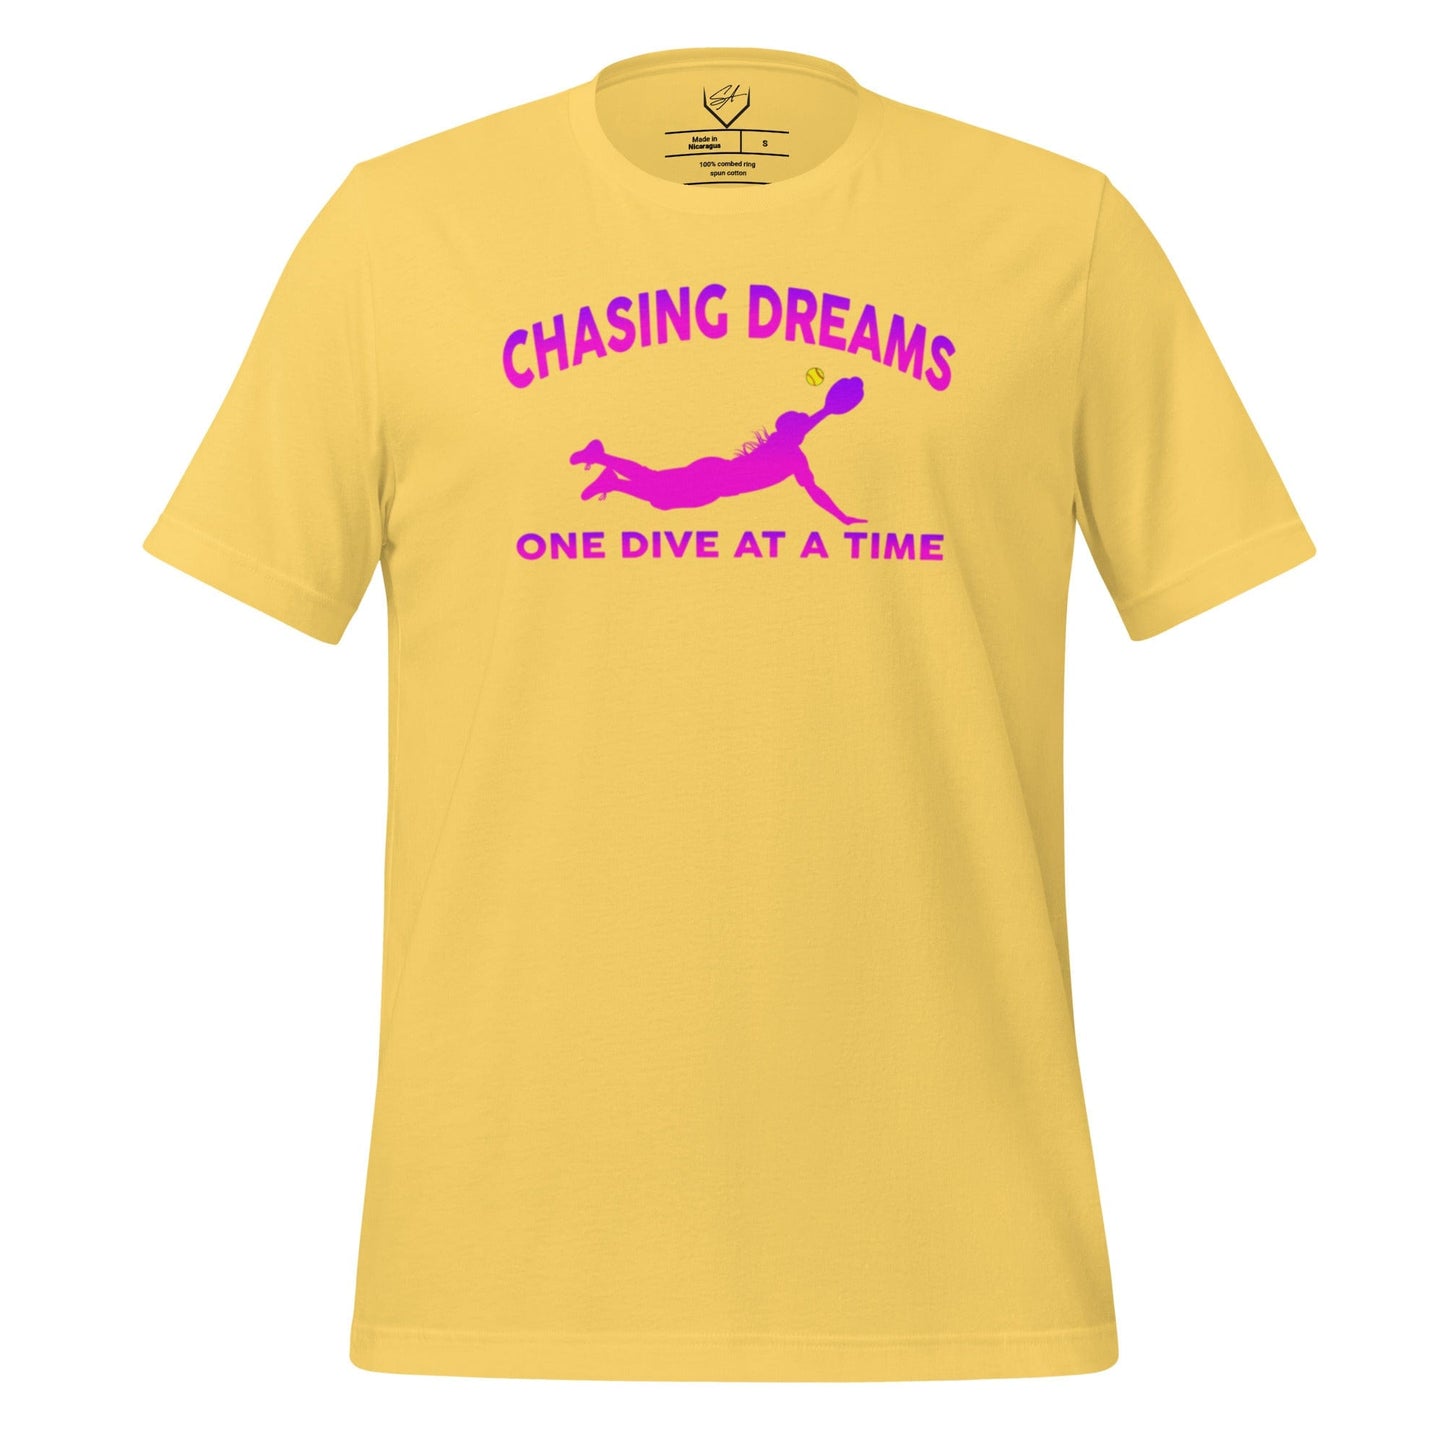 Chasing Dreams One Dive At A Time - Adult Tee